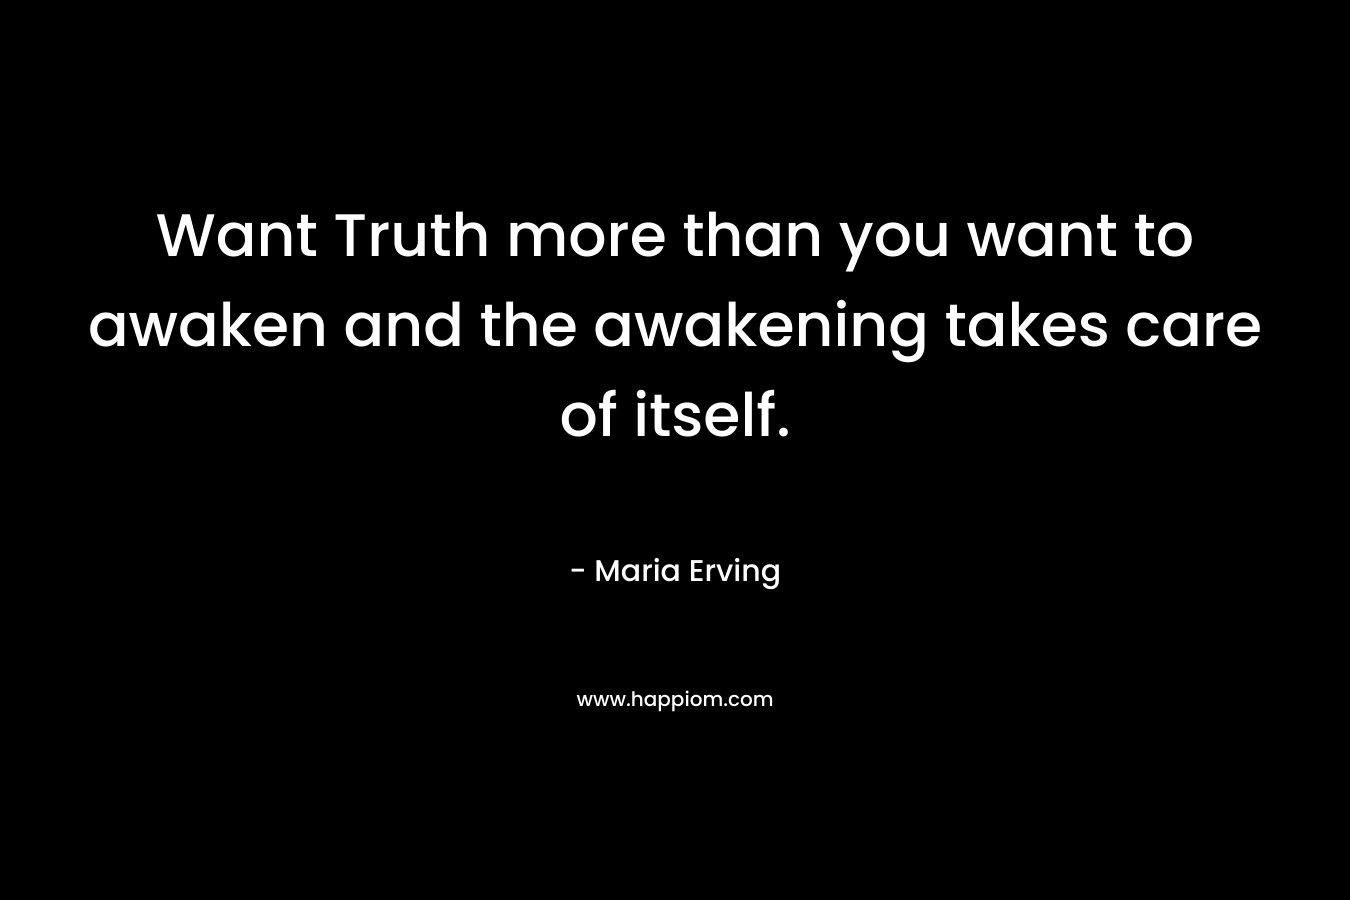 Want Truth more than you want to awaken and the awakening takes care of itself.